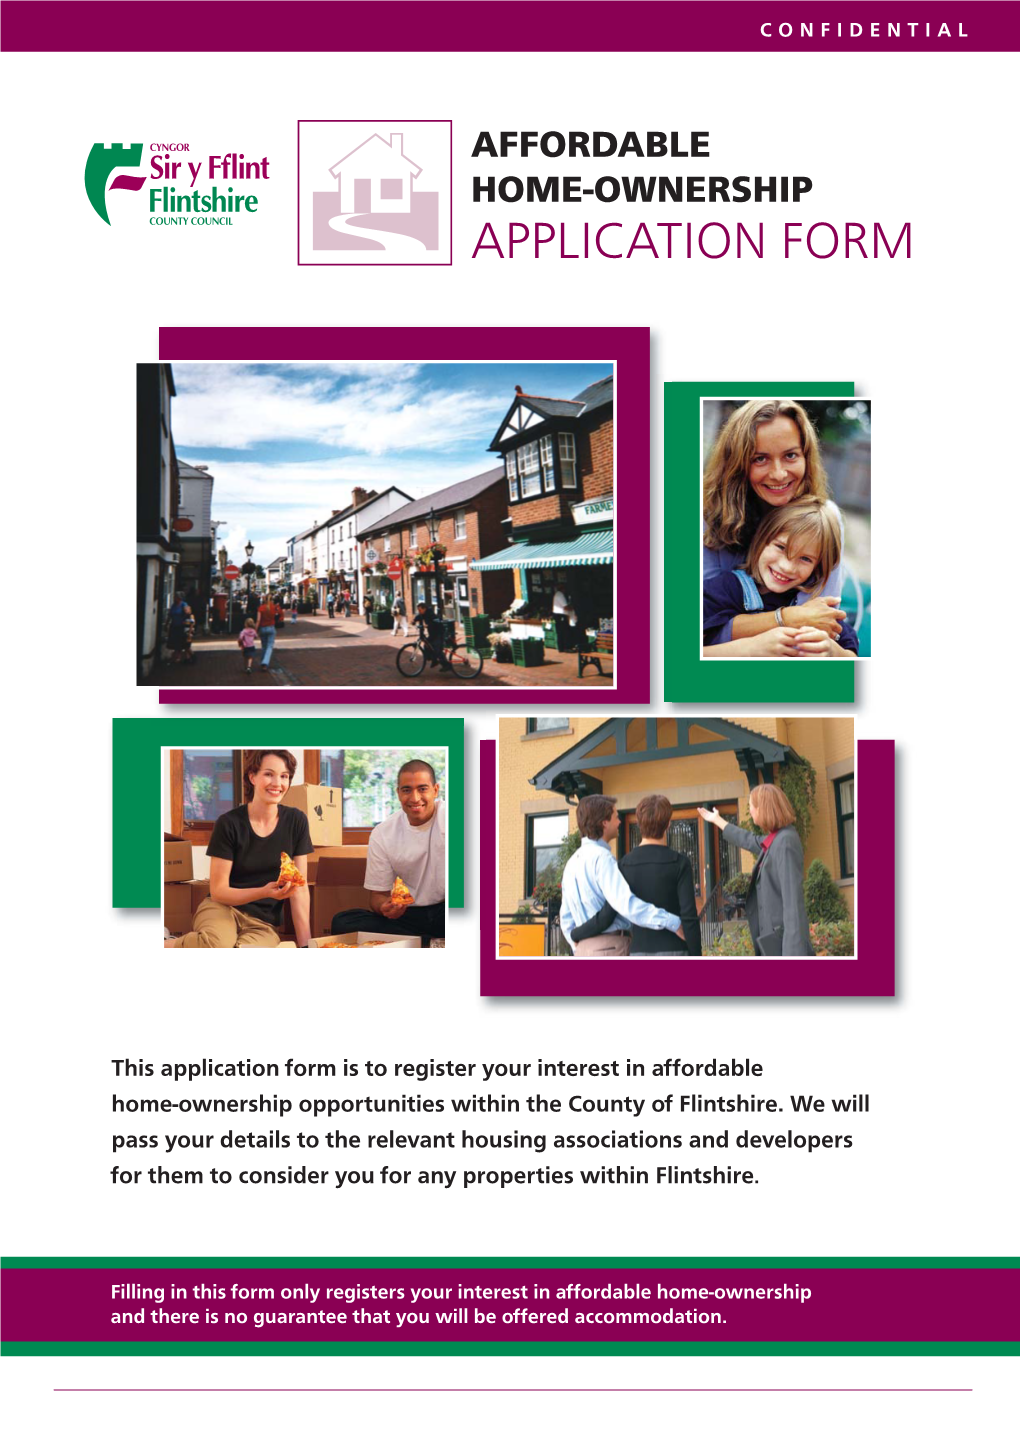 Affordable Home-Ownership Opportunities Within the County of Flintshire